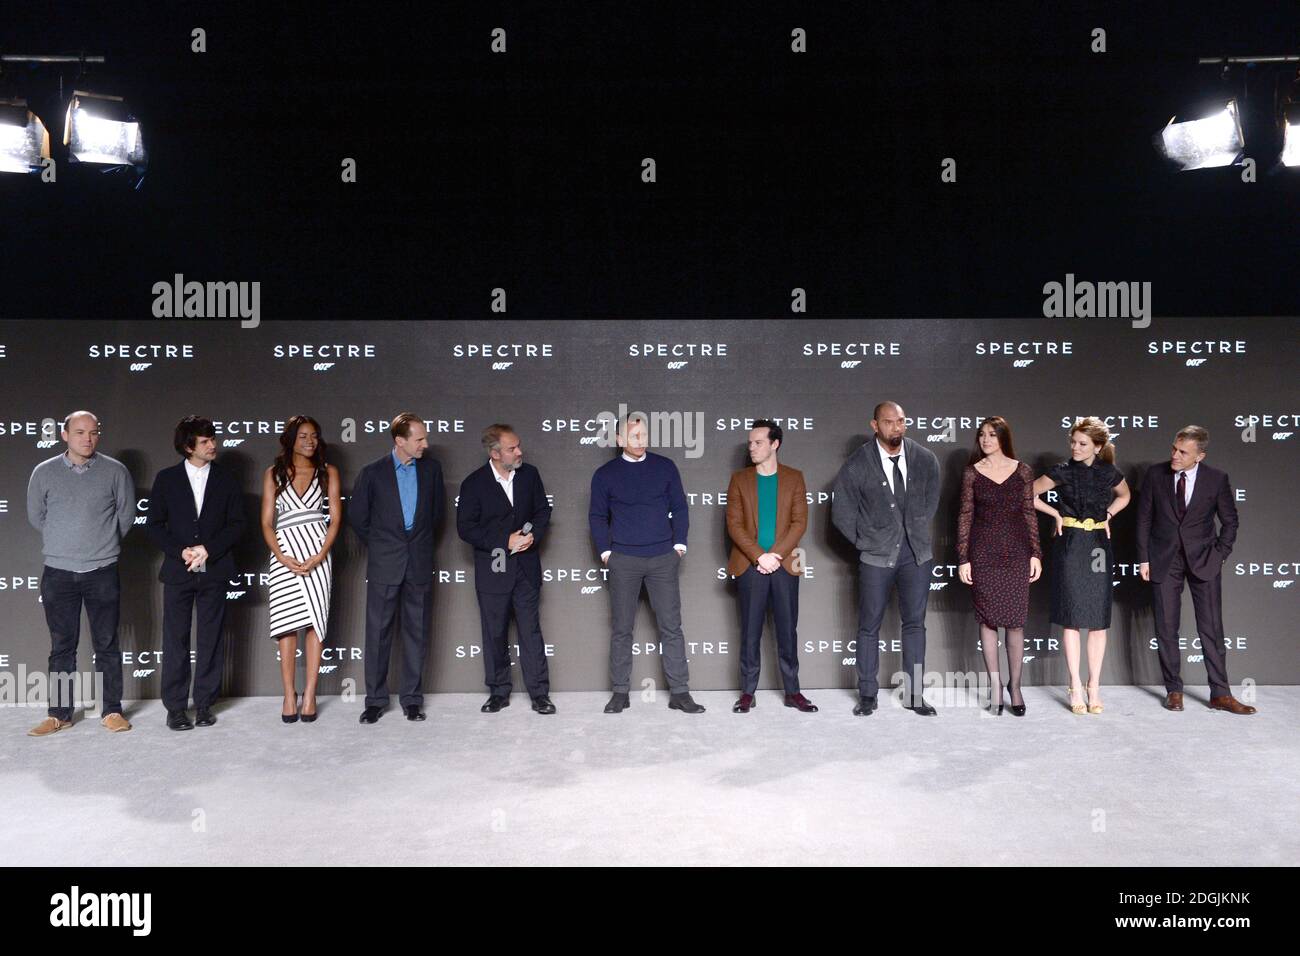 Rory Kinnear, Ben Whishaw, Naomie Harris, Ralph Fiennes, Sam Mendes, Daniel Craig, Andrew Scott, Dave Bautista, Monica Bellucci, Lea Seydoux and Christoph Waltz attend the BOND 24 live announcement to mark the start of production on the 24th Bond film held at Pinewood Studios, London   The title and cast of the 24th Bond film were revealed, marking the start of principal photography on Monday 8th December Stock Photo